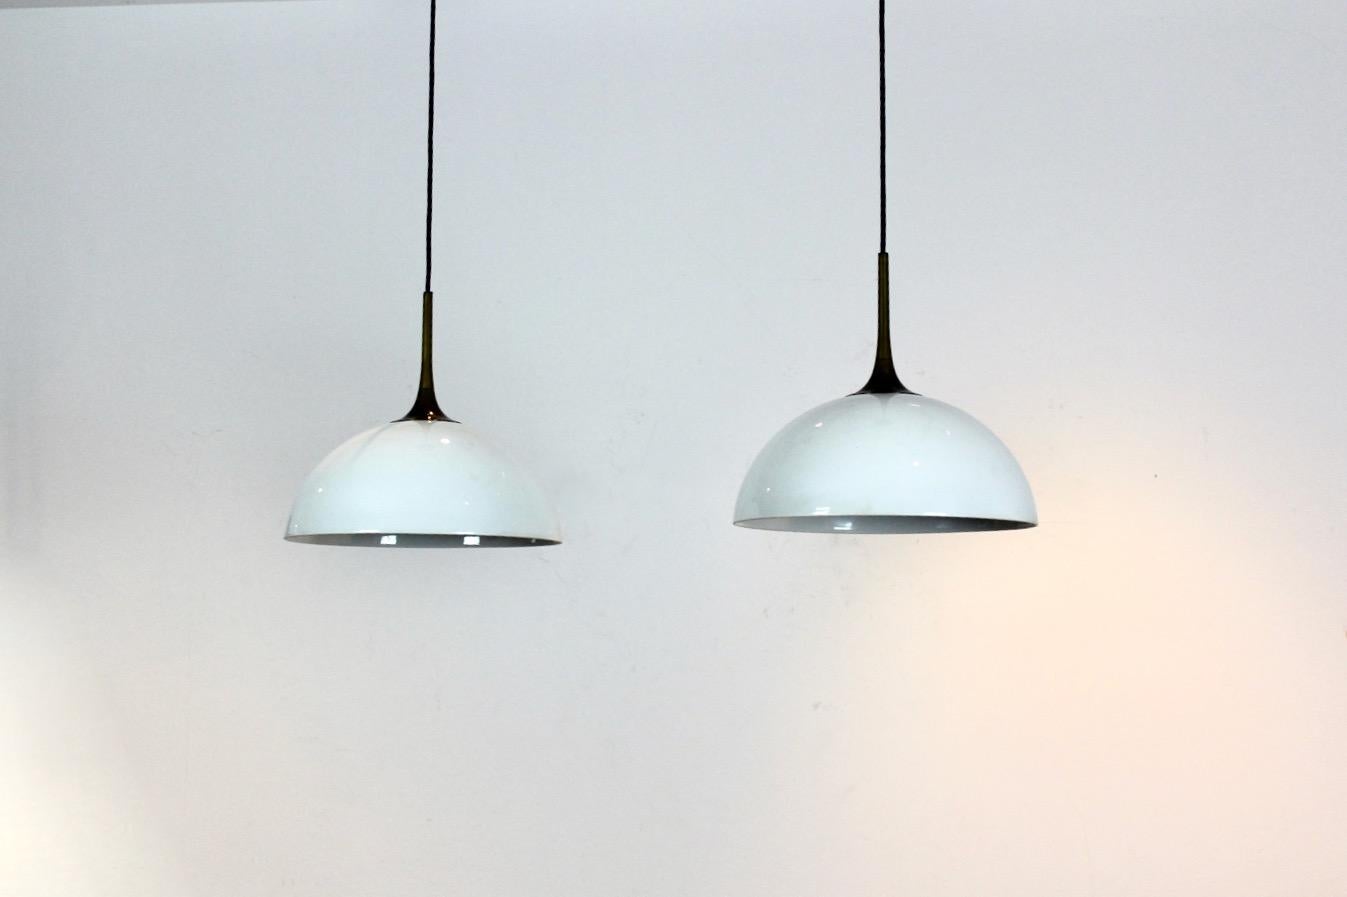 Elegant Pair of Brass and White-Opal Glass Pendant Lights by Florian Schulz For Sale 2